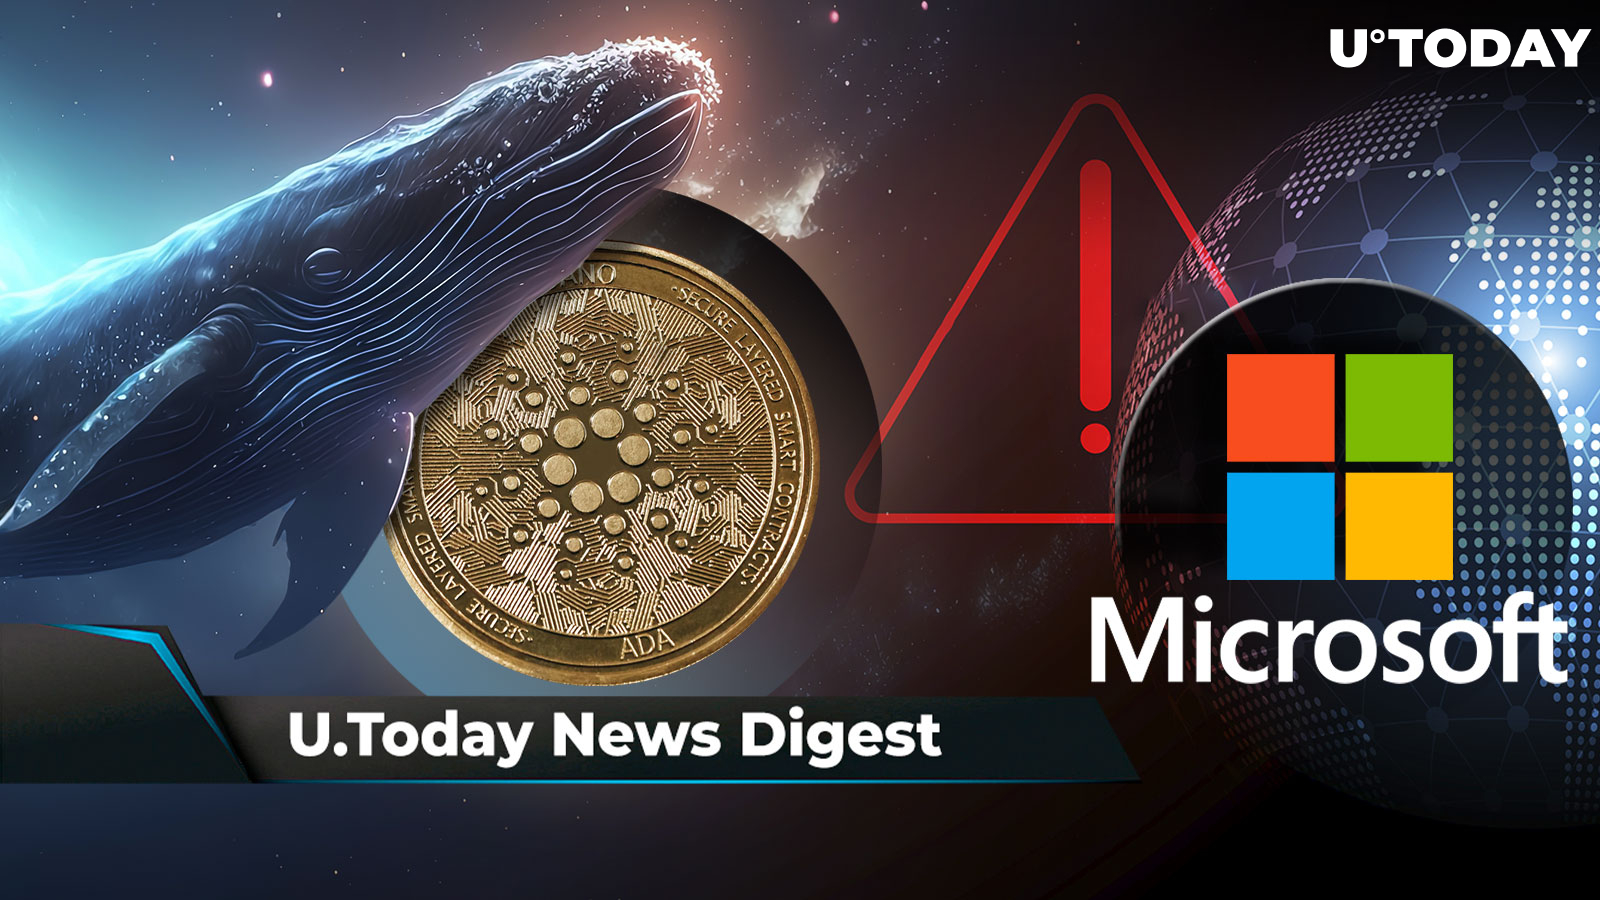 Cardano Sees $1.5 Billion Whale Transactions, Microsoft Issues Major Crypto Warning, This SHIB Trend Might Trigger New Bull Run: Crypto News Digest by U.Today